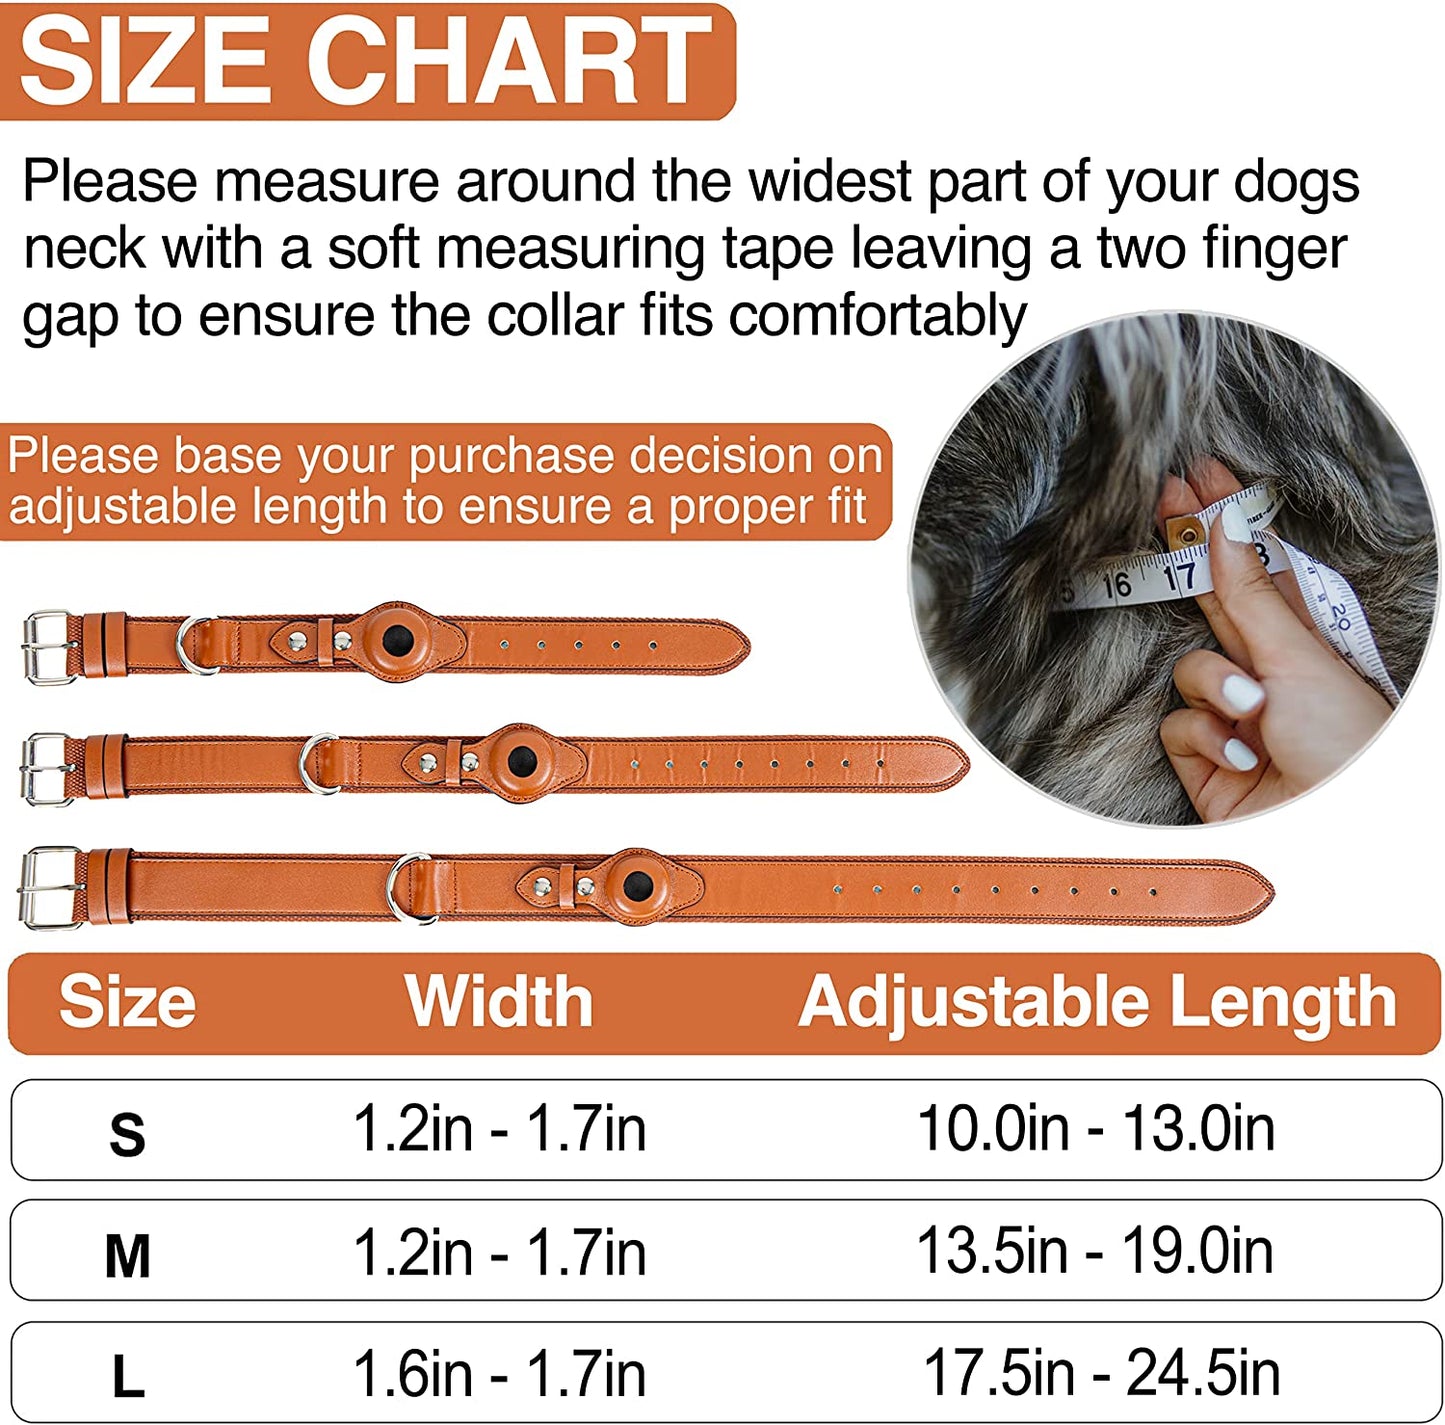 Safe Paws Airtag Dog Collar Holder - Our Adjustable Air Tag Dog Collar Holder Fits Small Medium and Large Dogs - Use Our Elegant PU Leather Dog Airtag Collar to Quickly Locate Your Dog Electronics > GPS Accessories > GPS Cases Safe Paws   